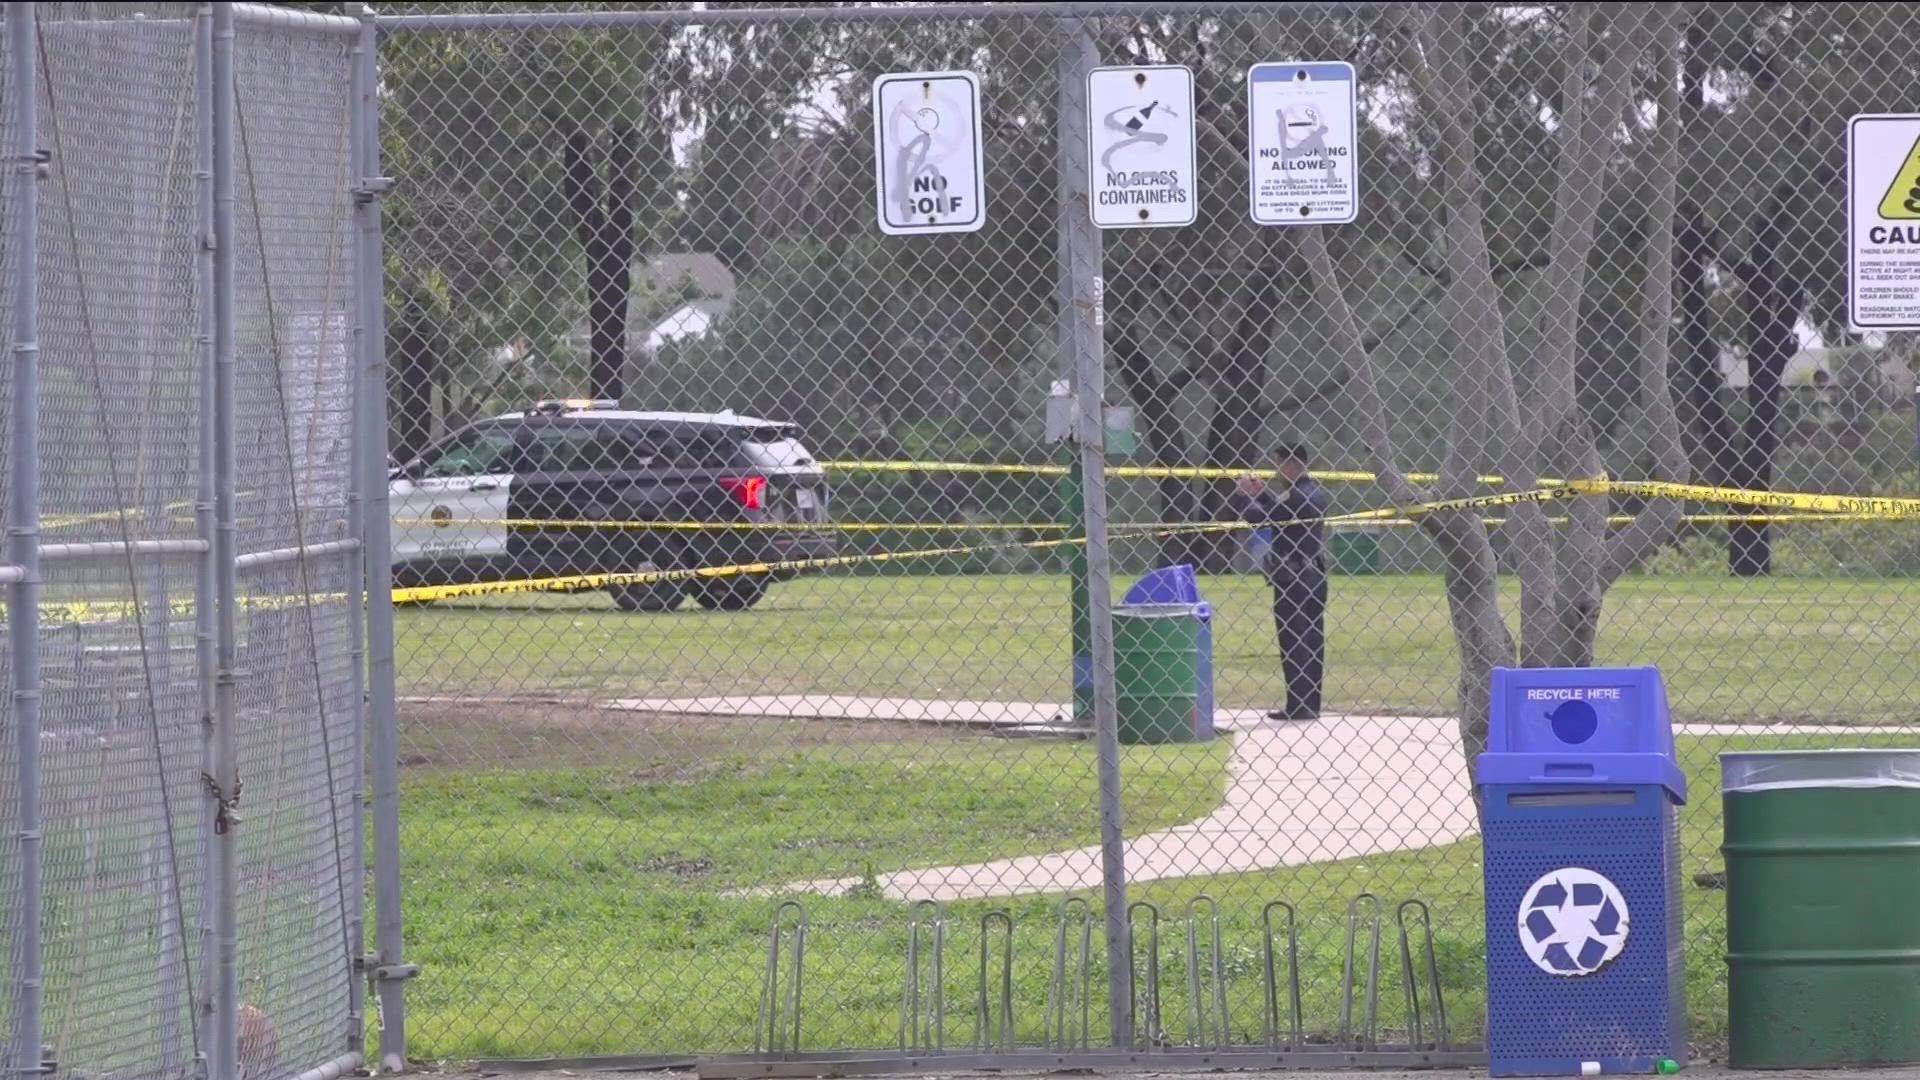 At least one man was killed in a shooting at North Clairemont Recreation Center while a youth basketball game was underway nearby.